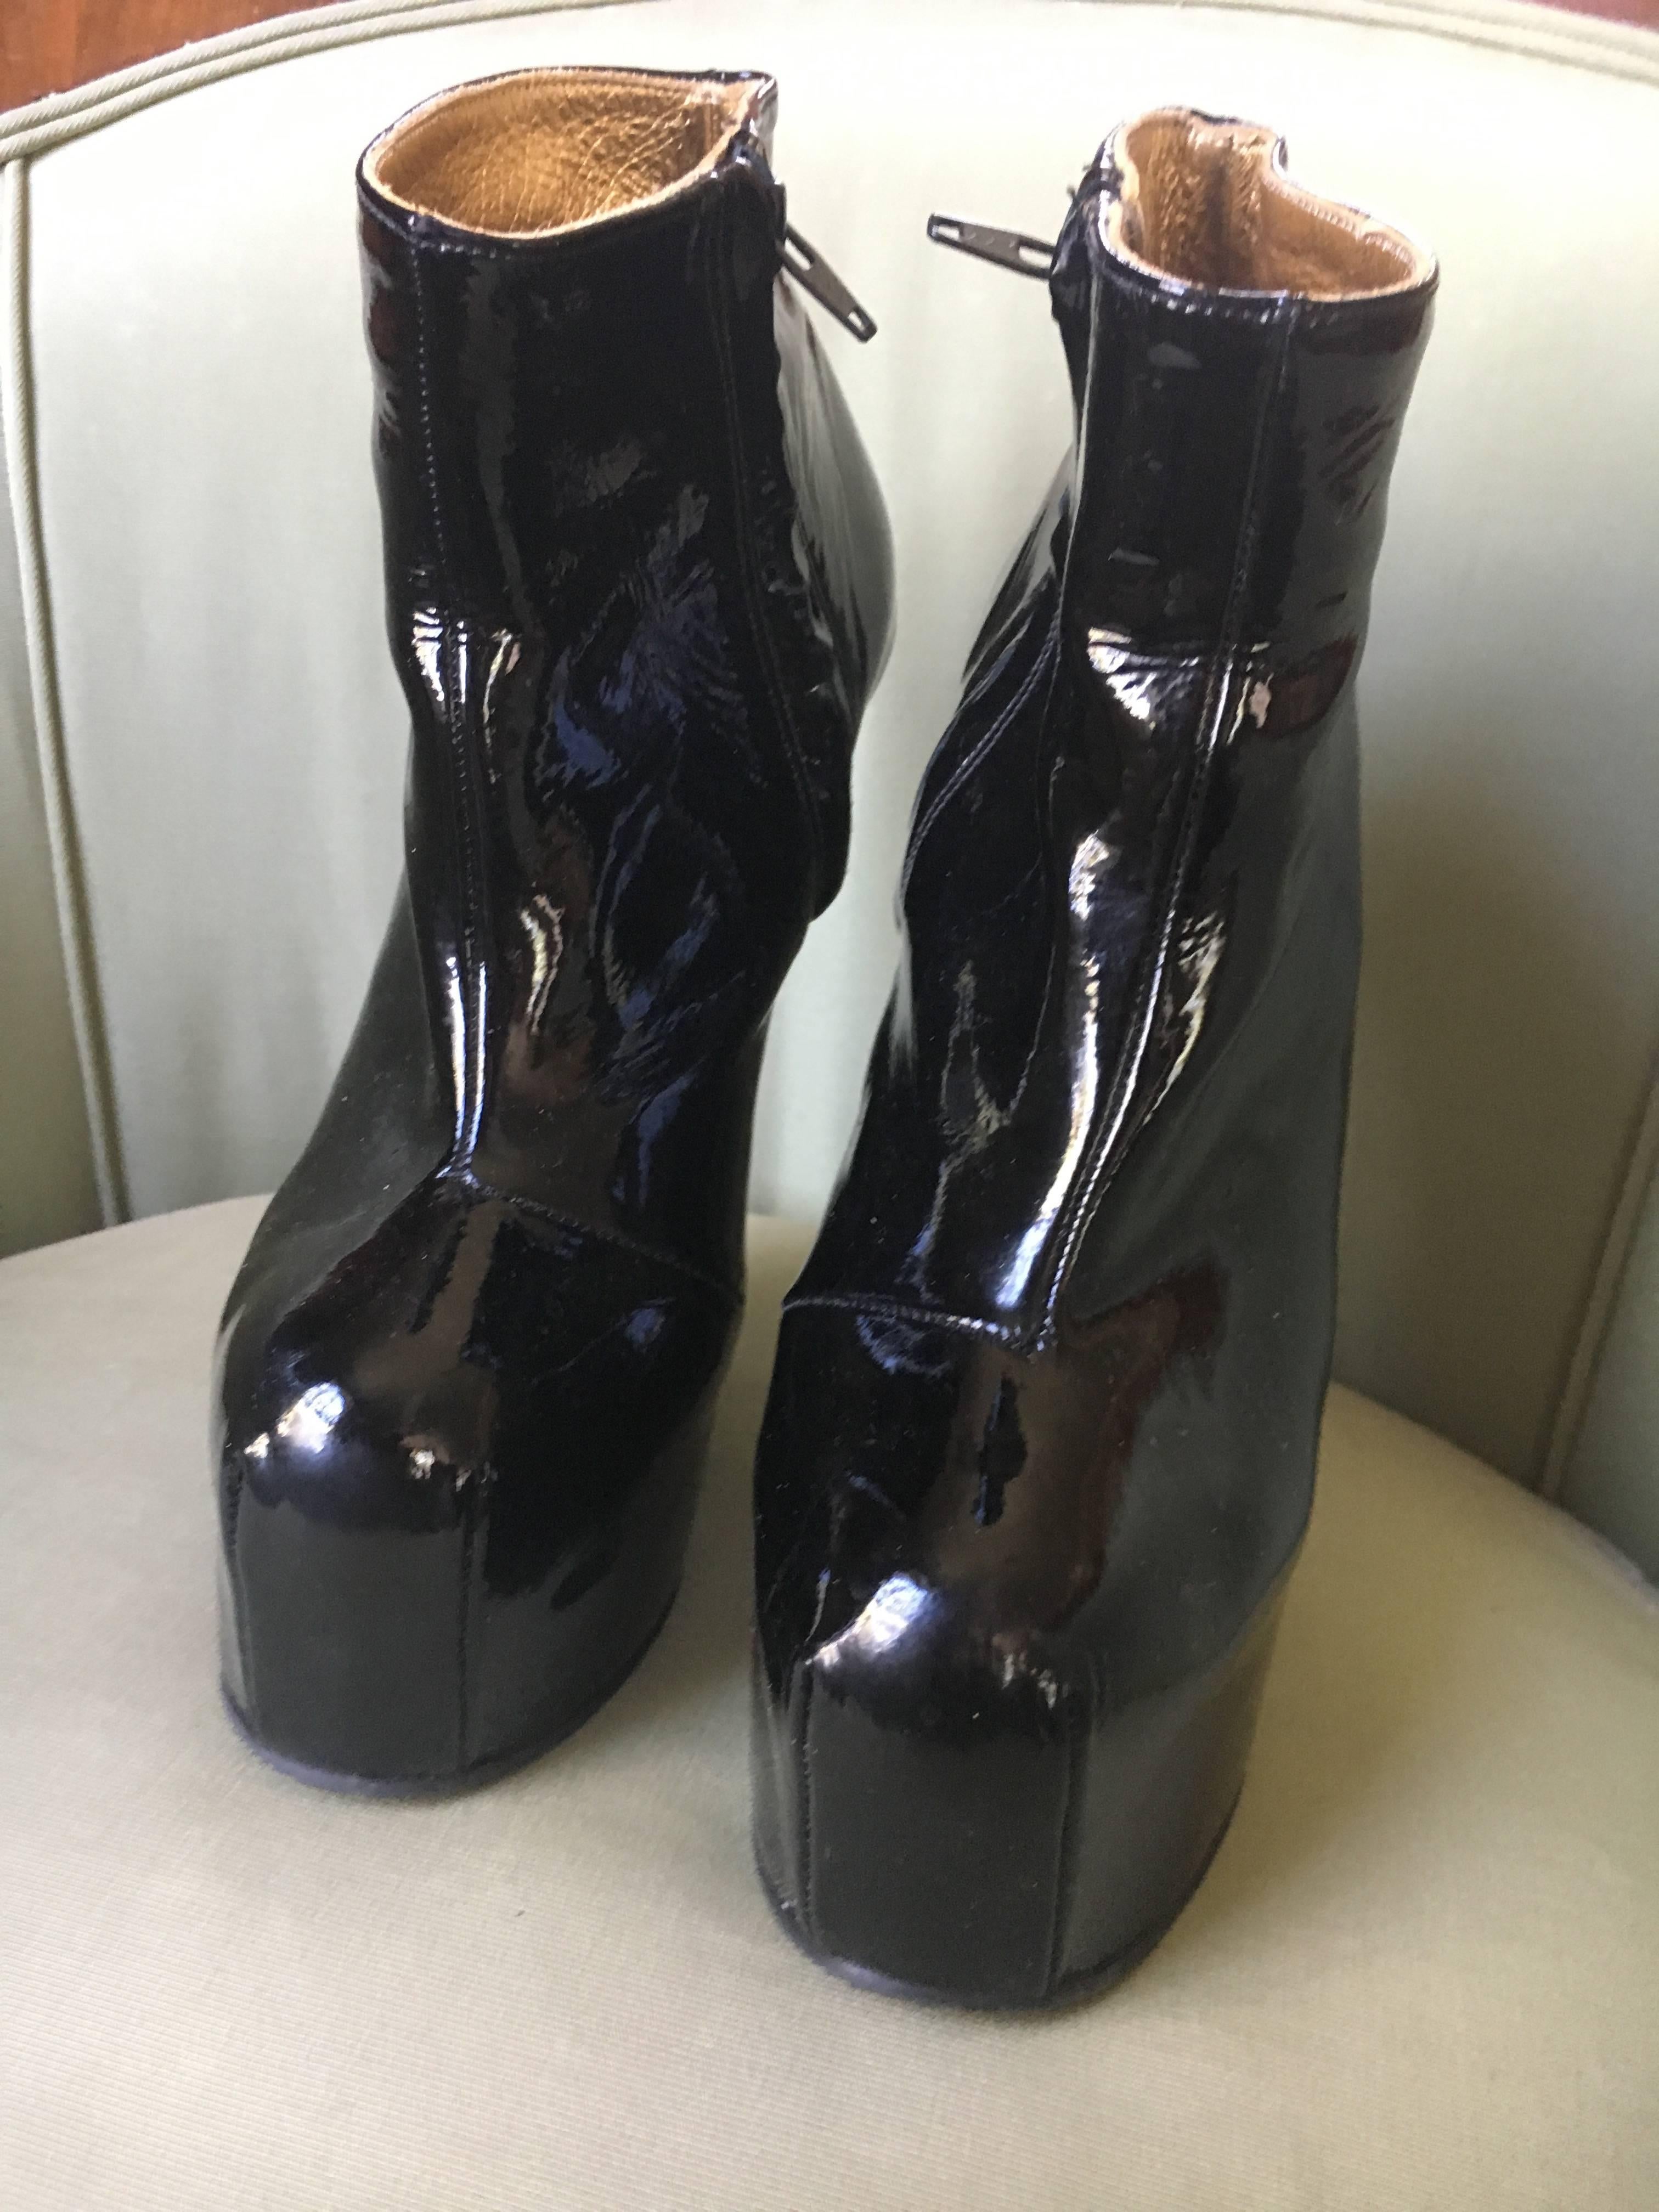 Natacha Marro London Black Patent Leather Fetish Heelless Platform Booties
Sz 10 US
A favorite of Daphne Guinness and Lady Gaga, these shoes are amazingly comfortable
Great pre owned condition